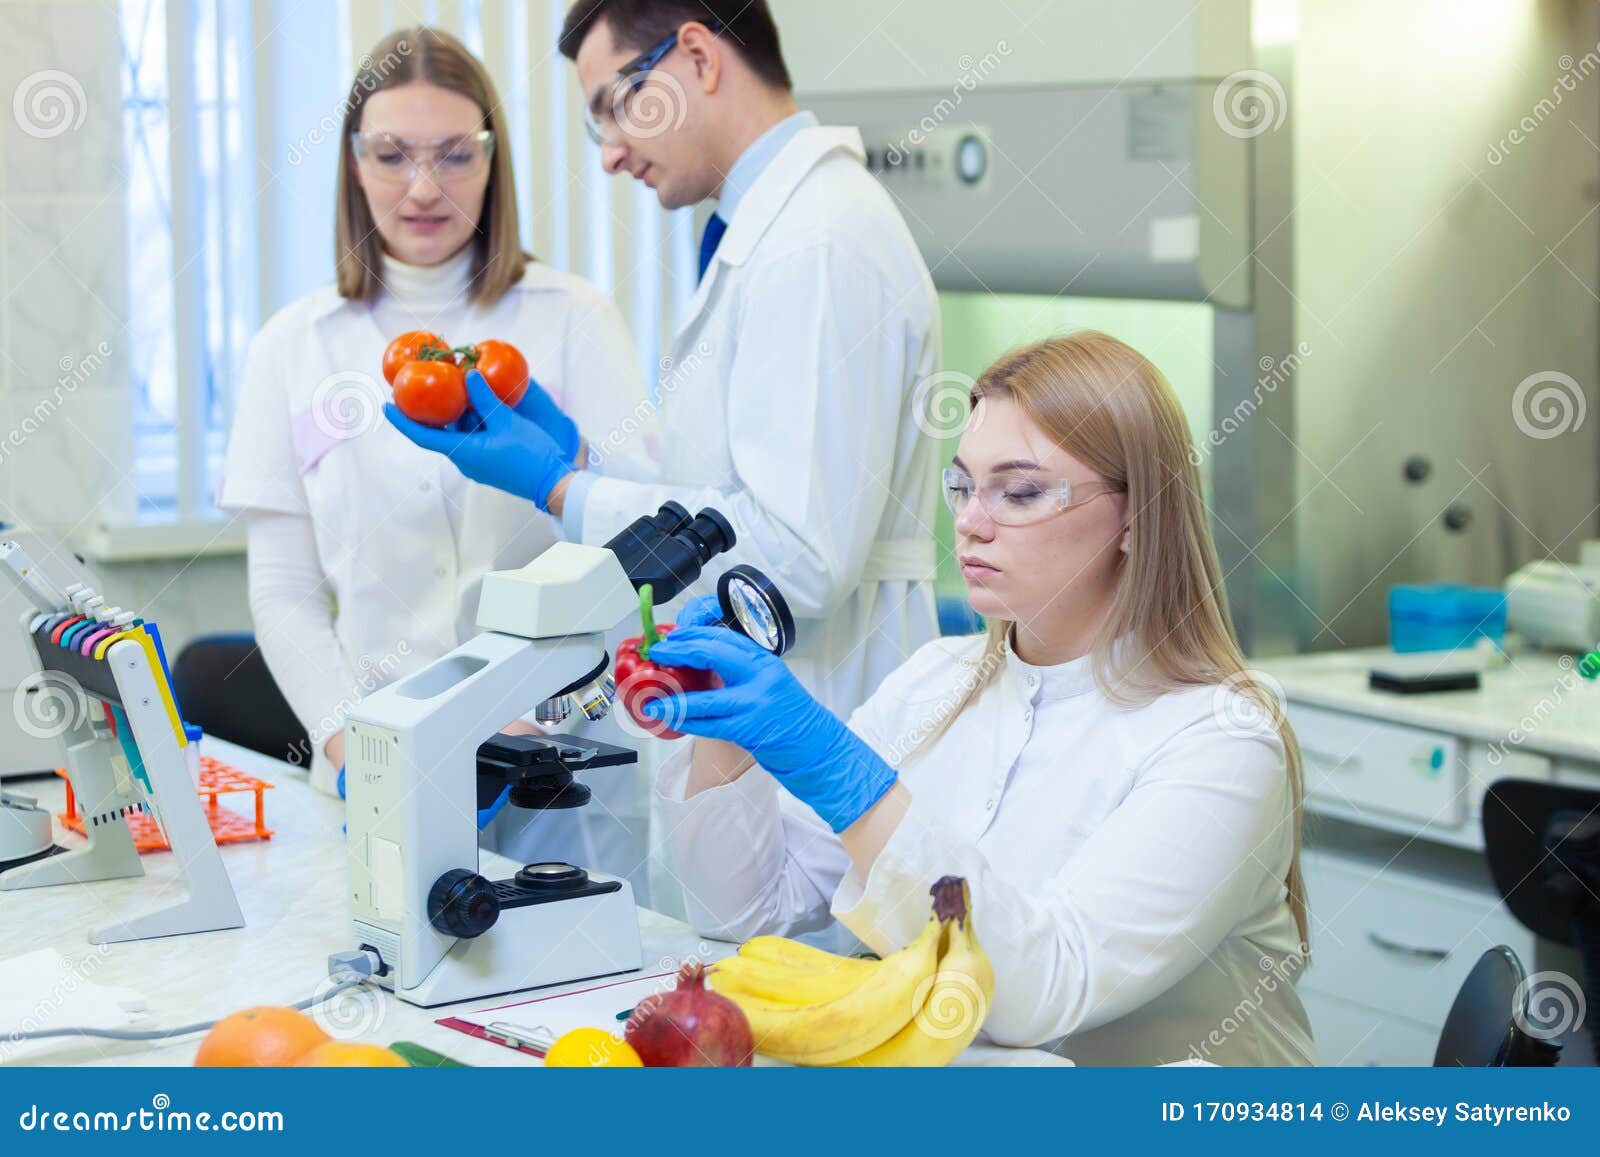 laboratory workers examining fruits and vegetables and making analysis for pesticides and nitrates.